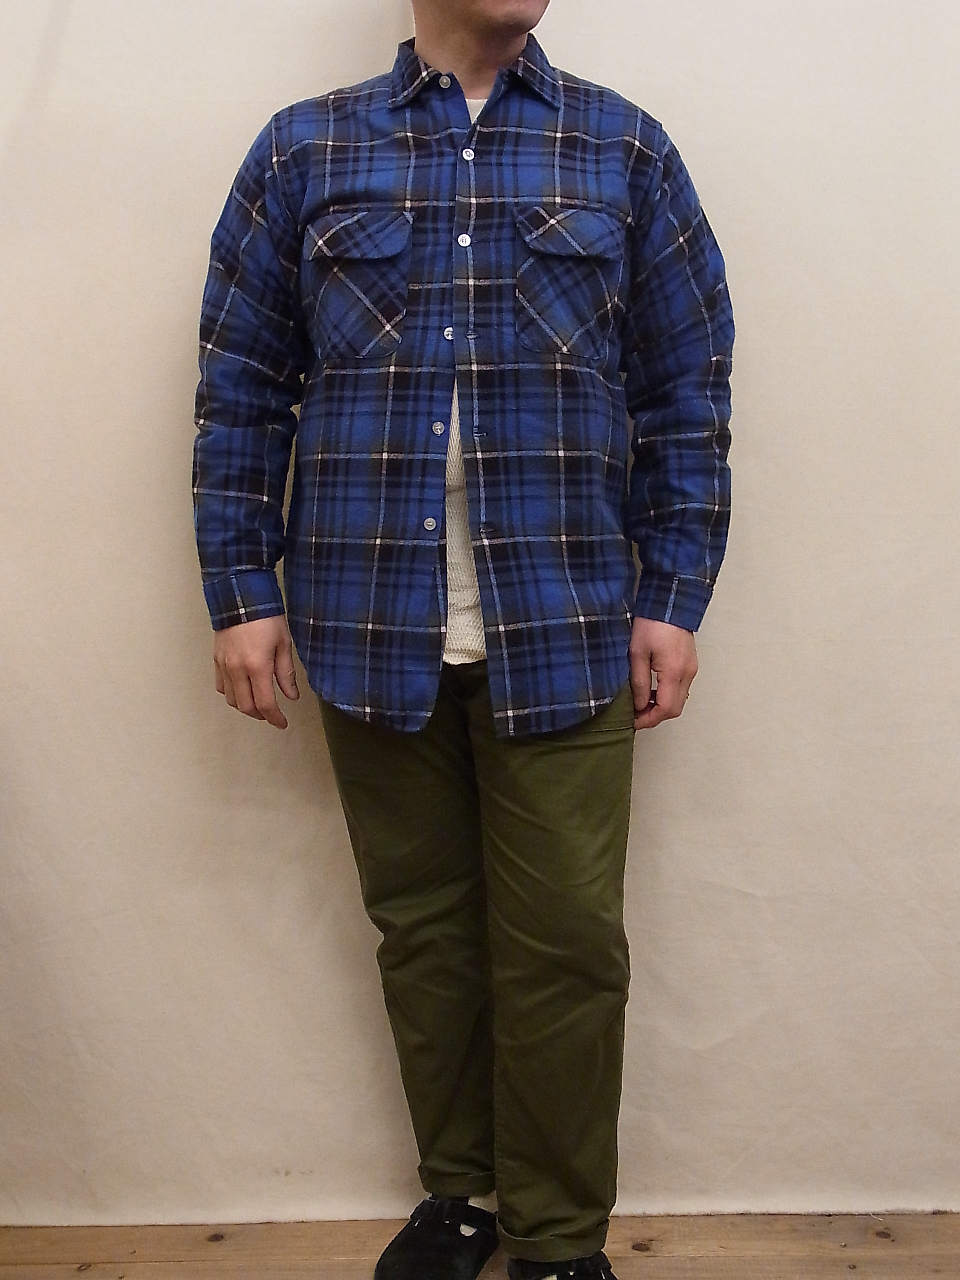 brent-printed-flannelshirts-20190325-2